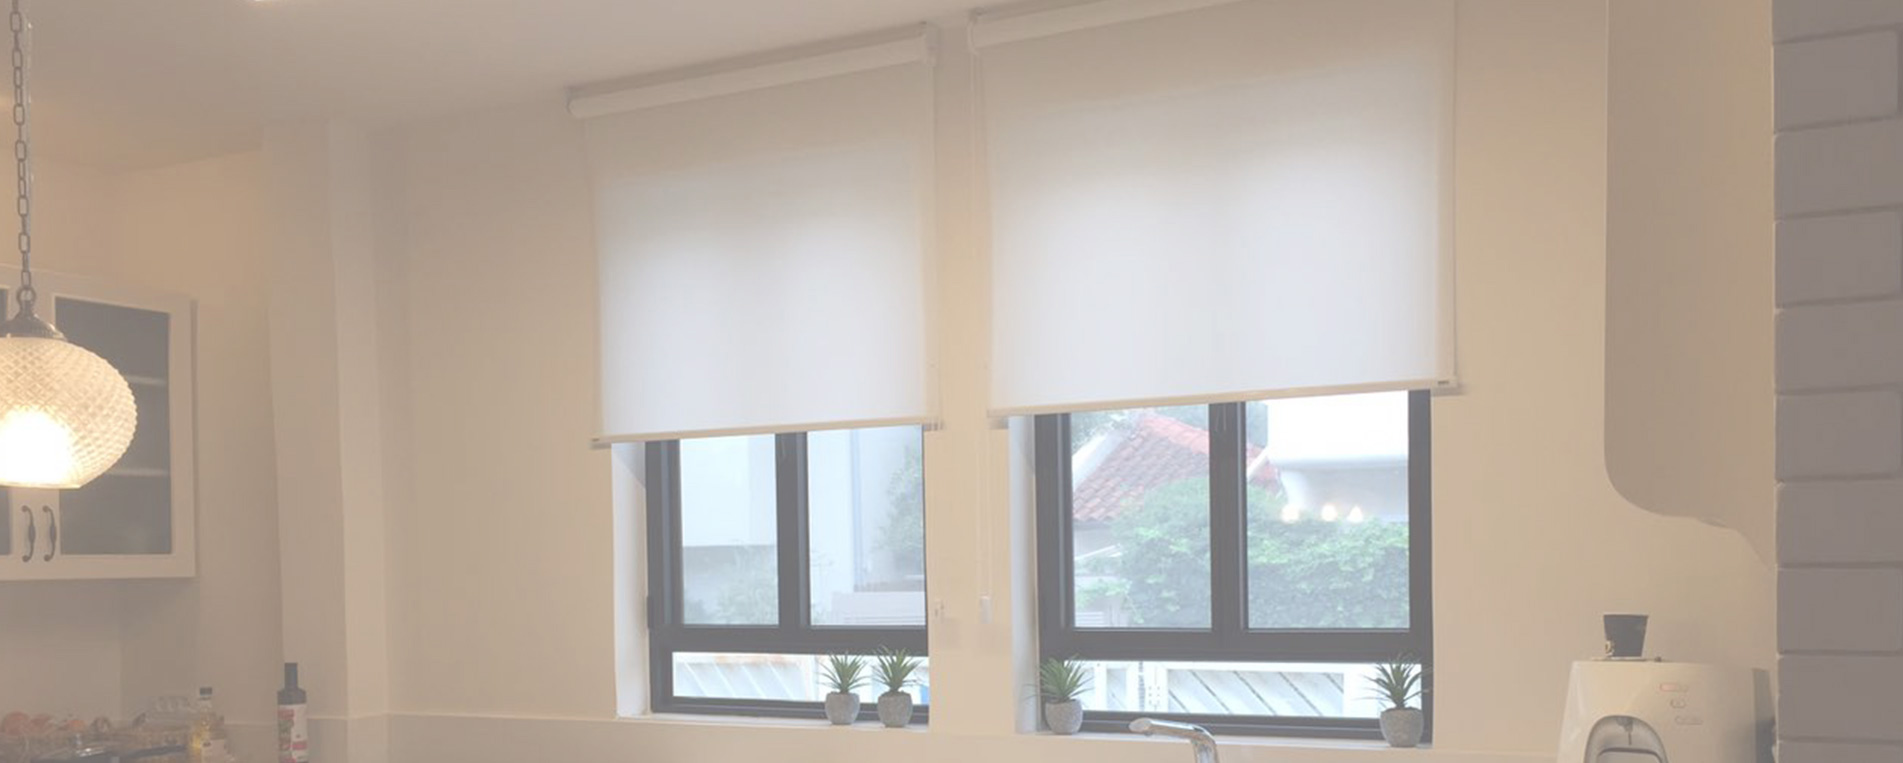 How to Pick and Choose Blinds and Shades